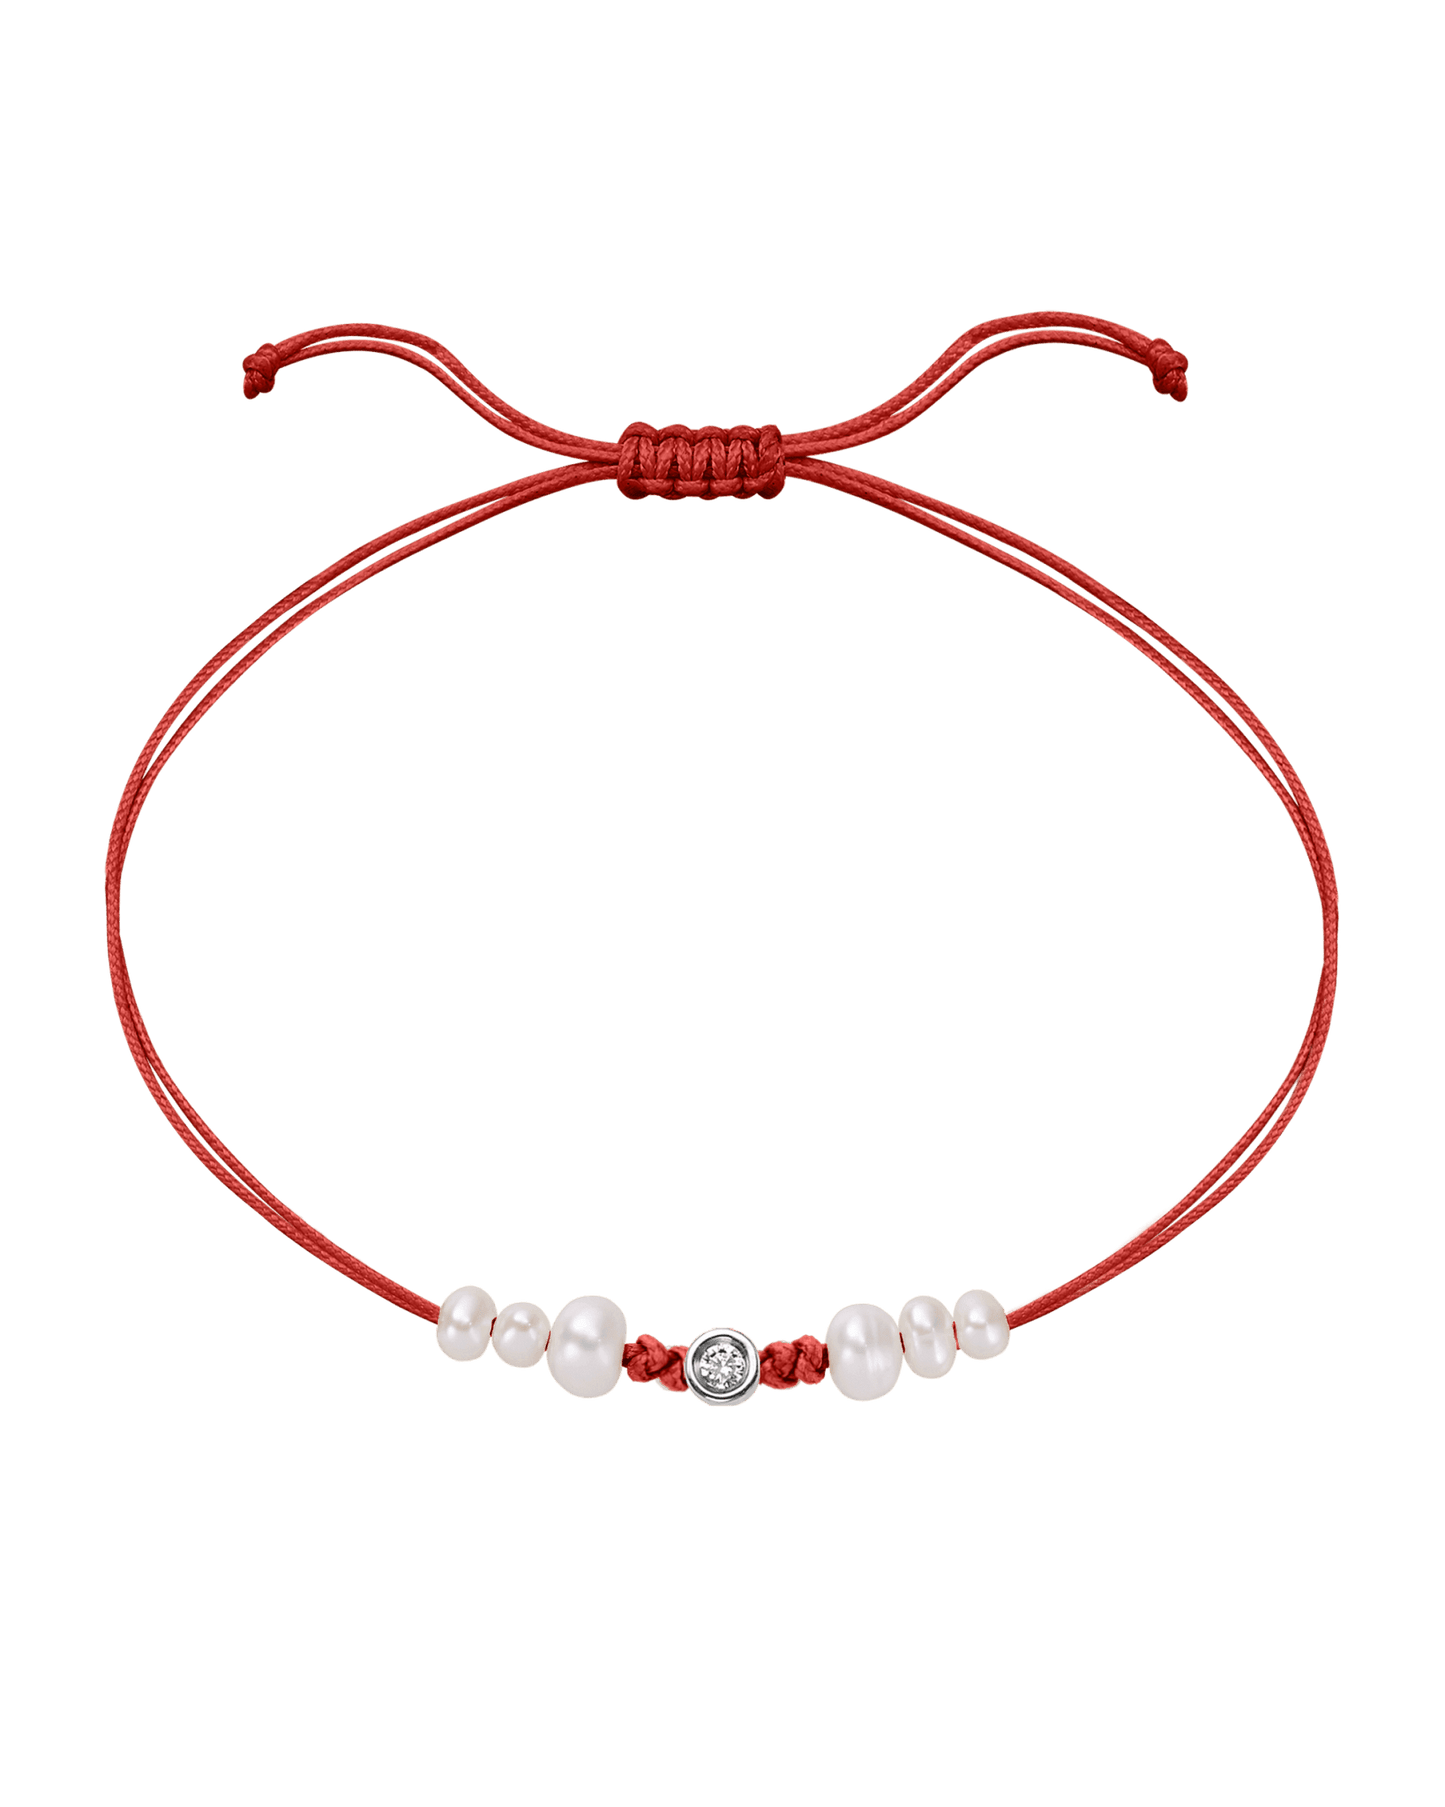 Six Natural Pearl String of Love Bracelet - 14K White Gold Bracelet 14K Solid Gold Red Small: 0.03ct 